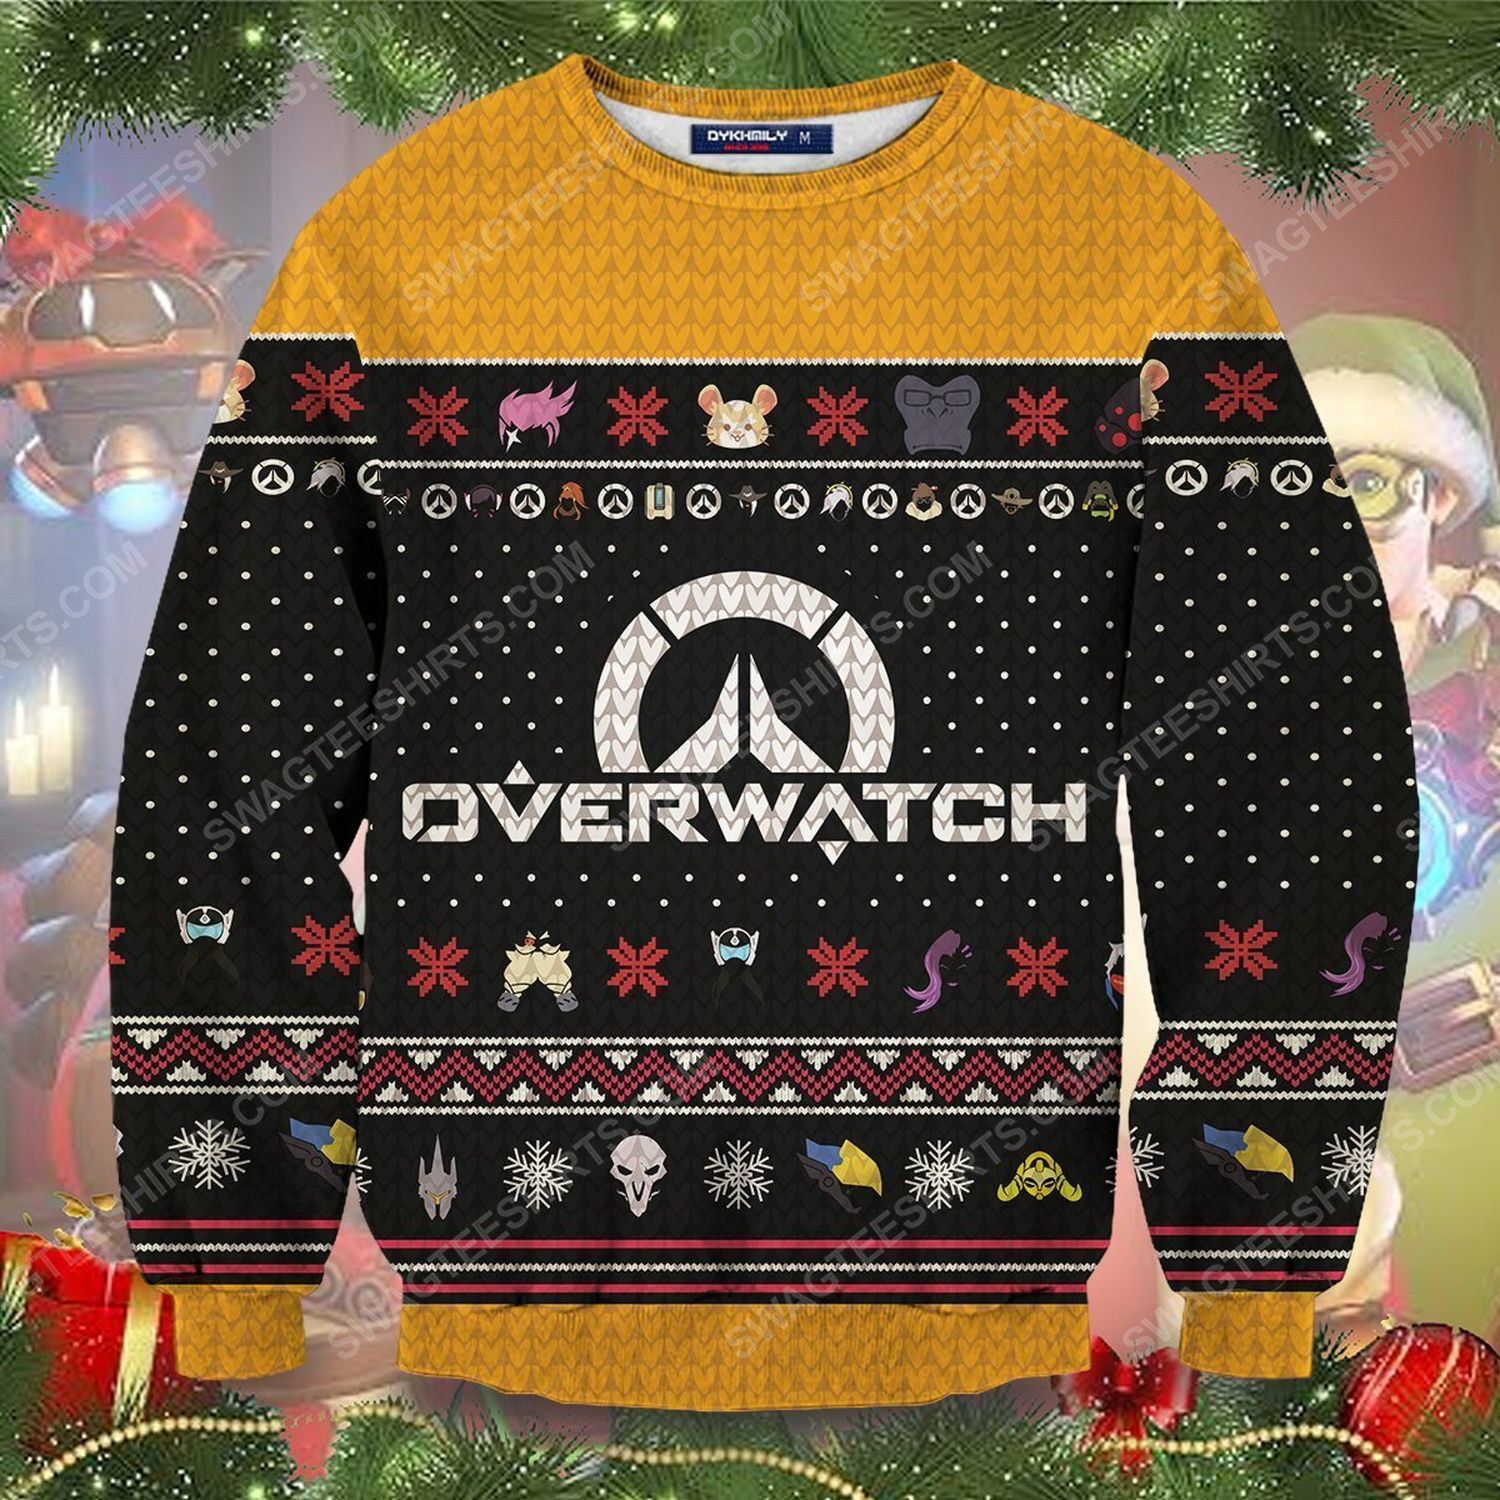 Ultimate overwatch full printing ugly christmas sweater 1